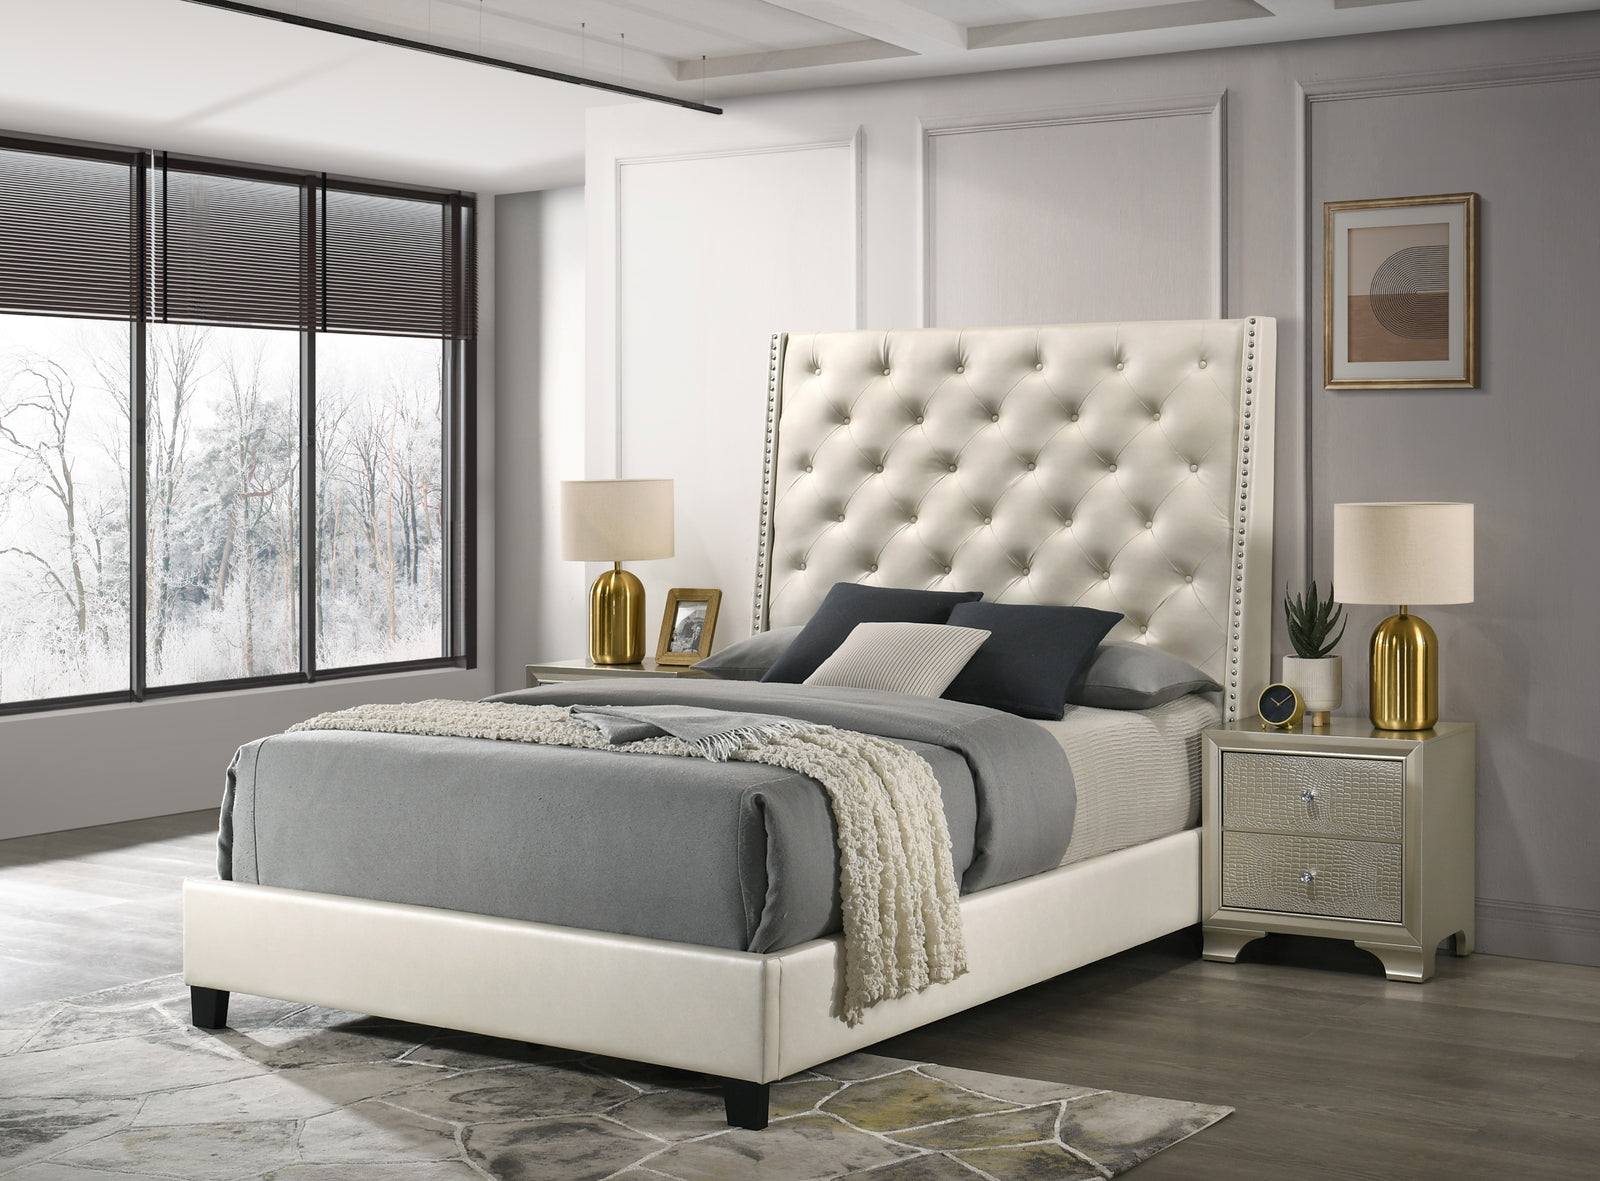 Chantilly Pearl Modern Solid Wood Faux Leather Upholstered Tufted Queen Bed